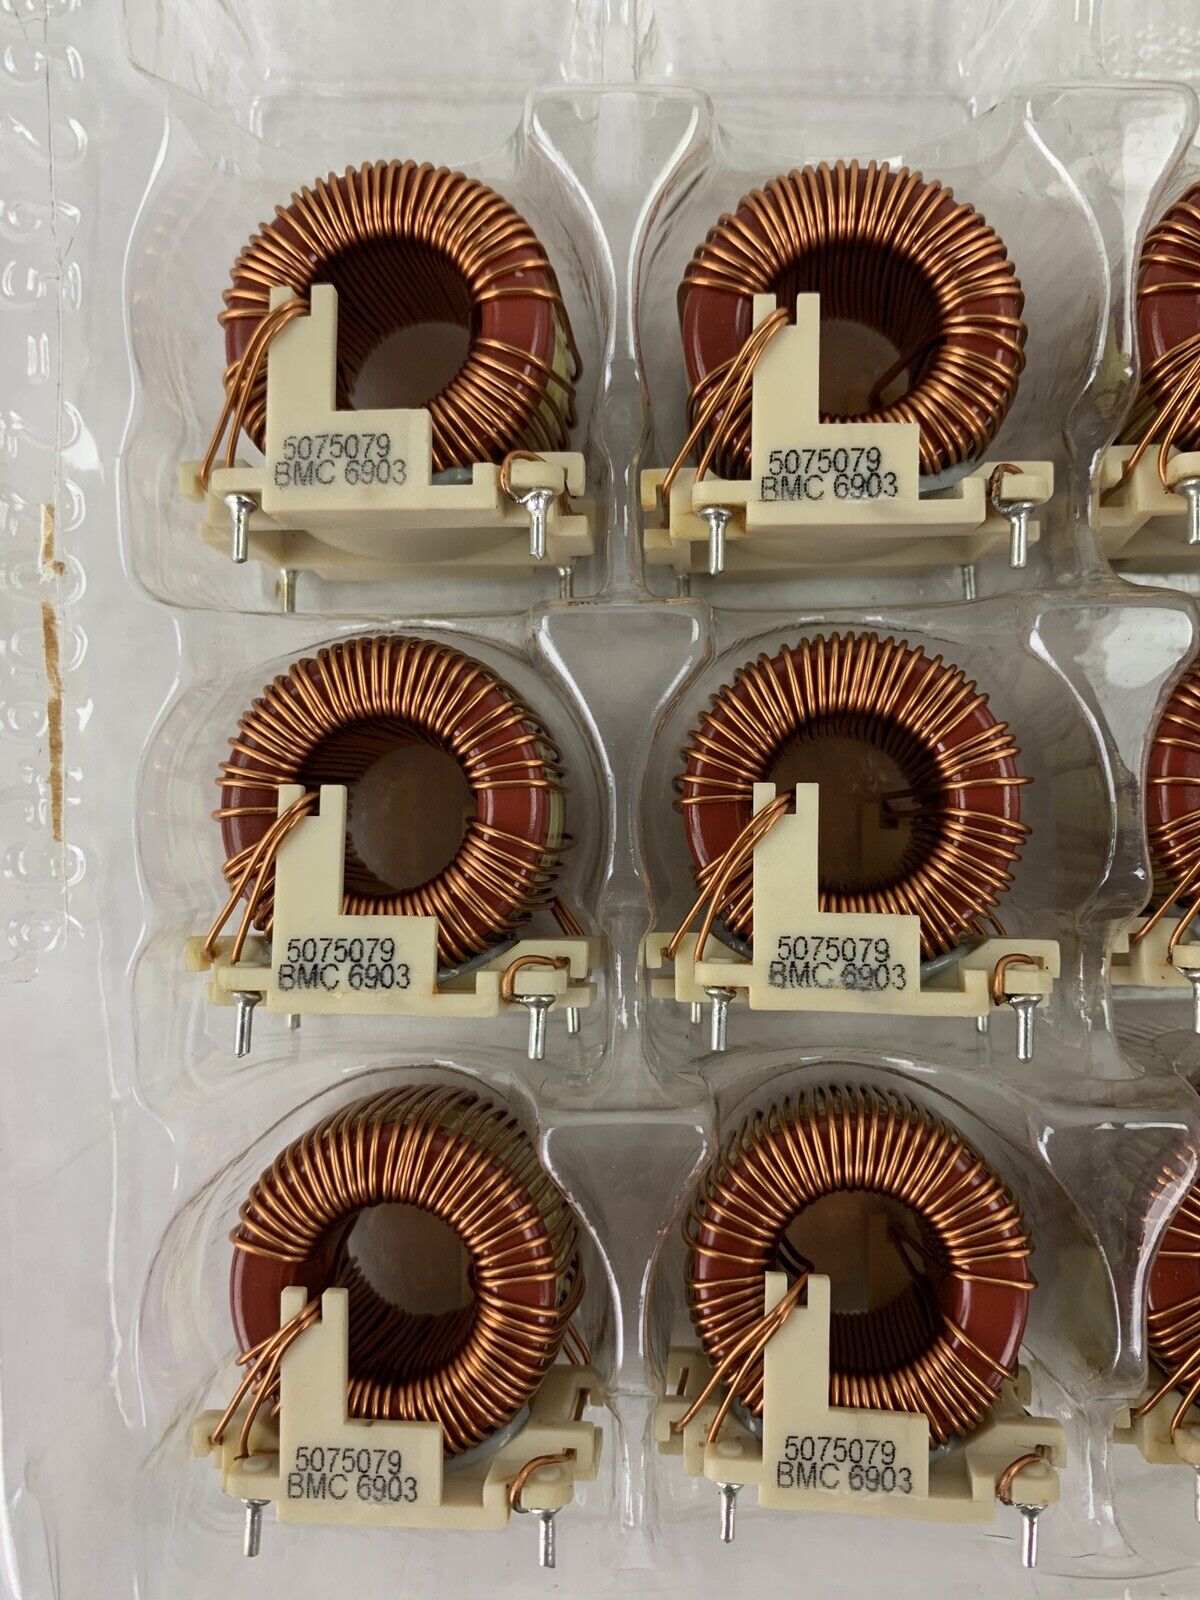 Lot of 12 Better Magnetics Corp Common Mode Choke Inductor BMC 6903 5075079